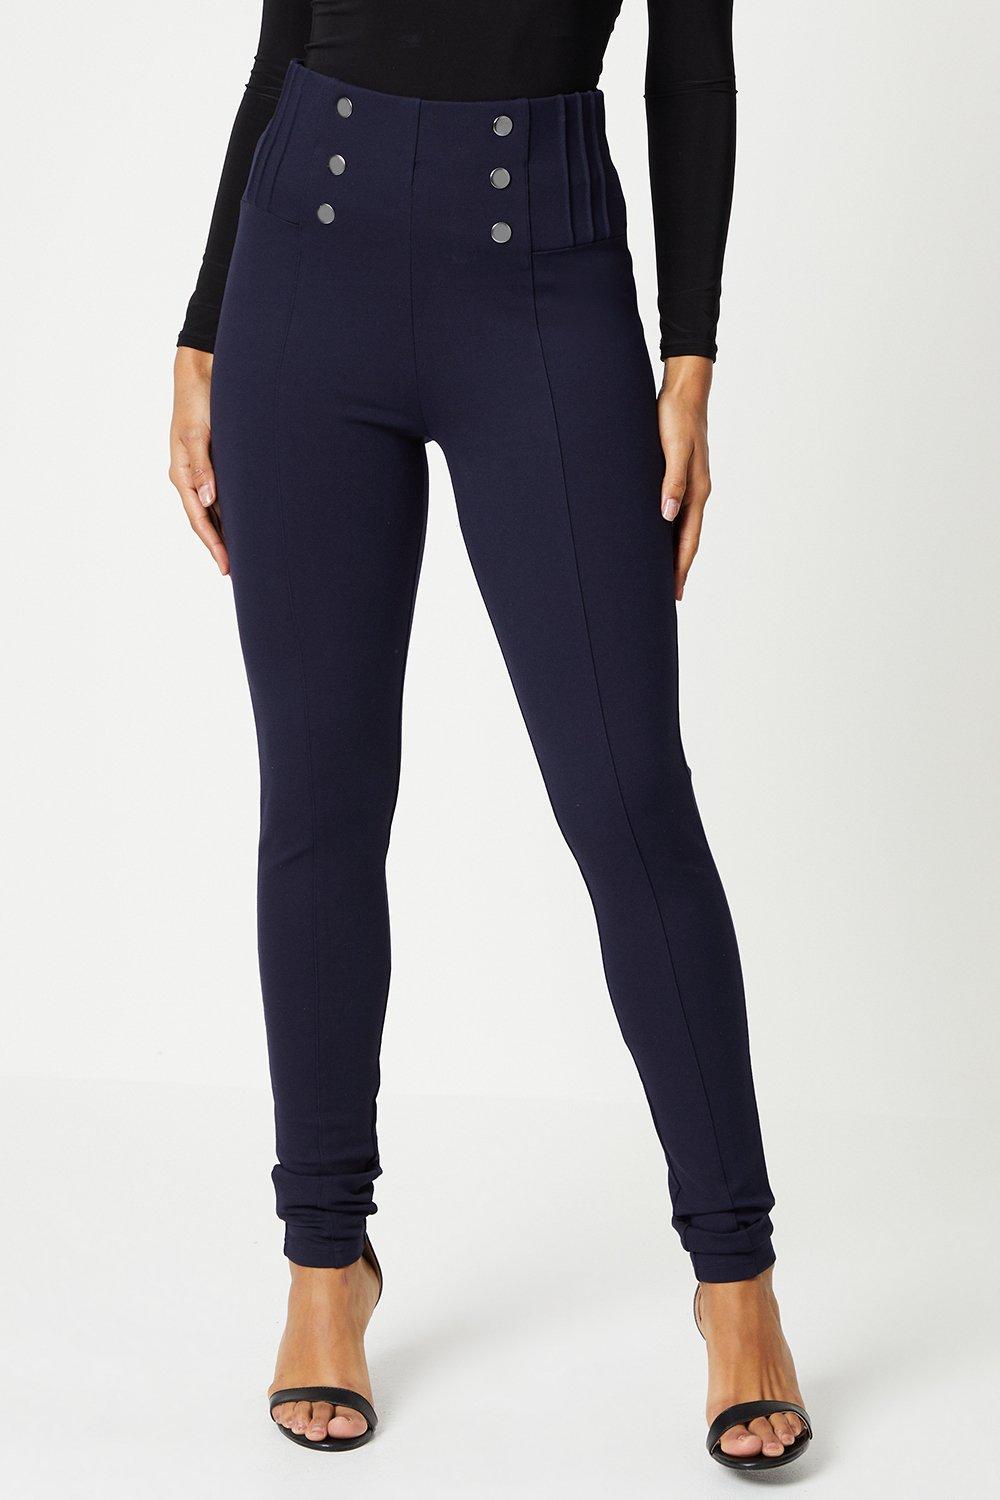 Women’s Tall Button Front Pleat Skinny Trouser - navy - 18